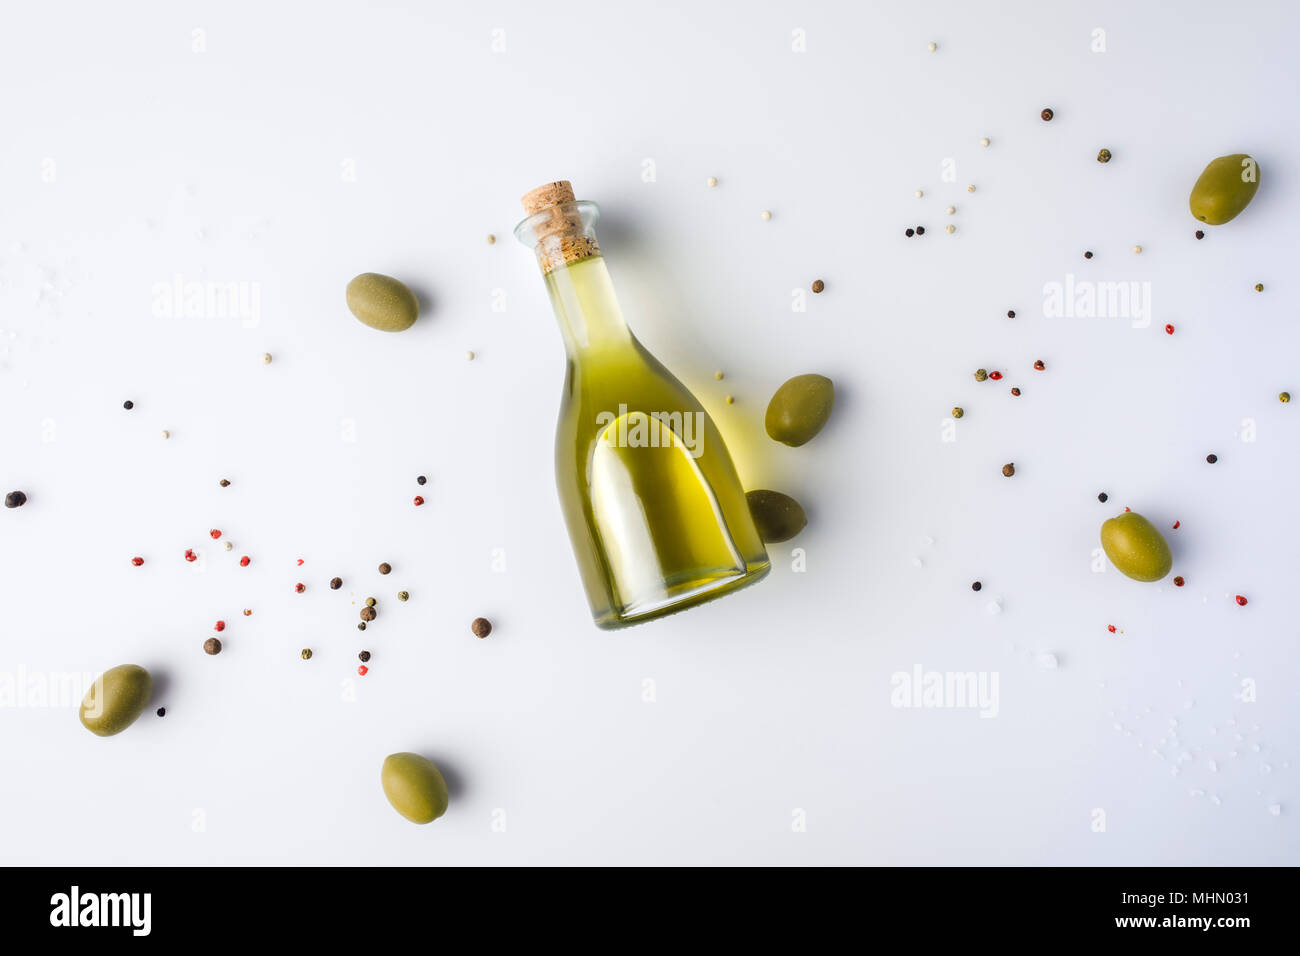 olive oil bottle with cork and olives Stock Photo